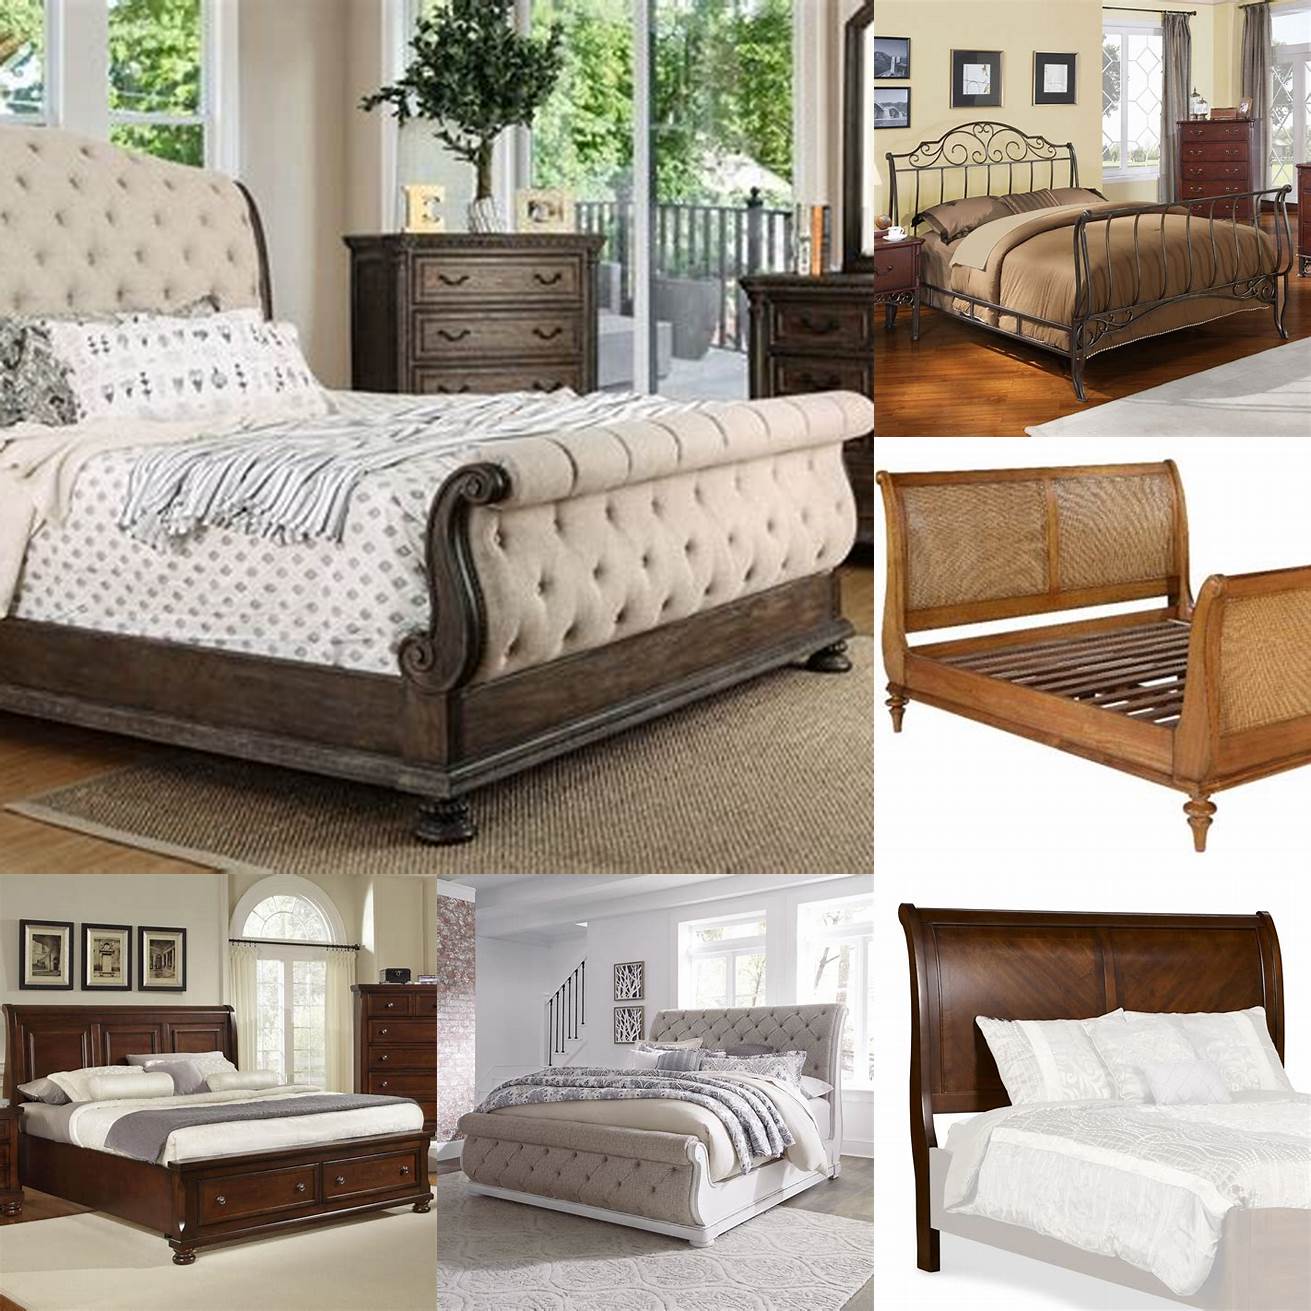 Sleigh Bed A sleigh bed has a curved headboard and footboard that resemble a sleigh